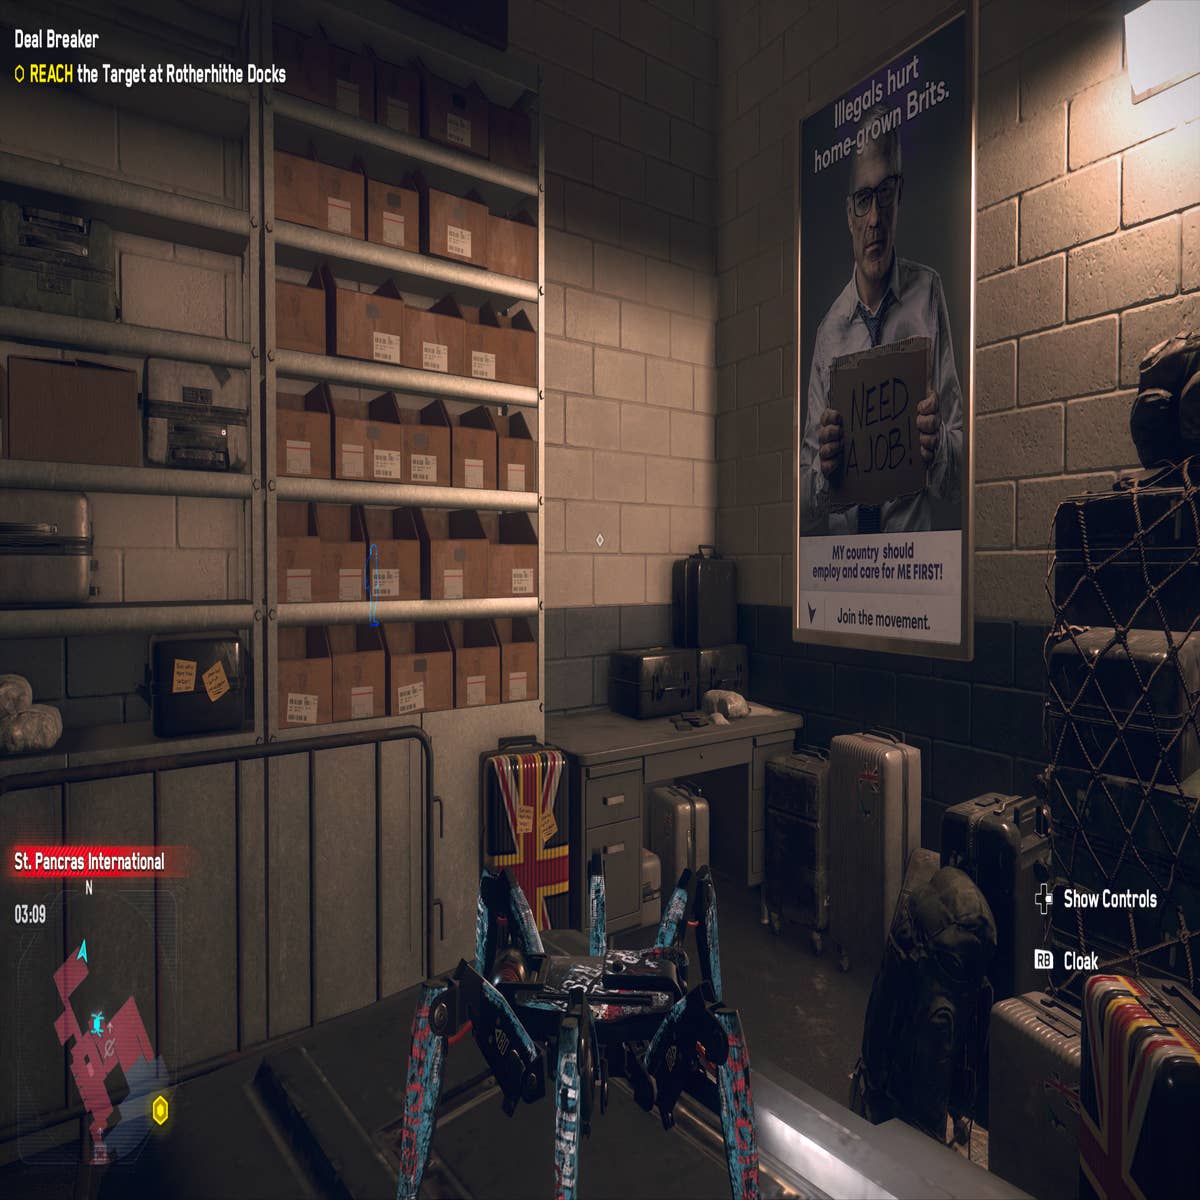 Review in progress: Bug hurts 'Watch Dogs Legions' promising start